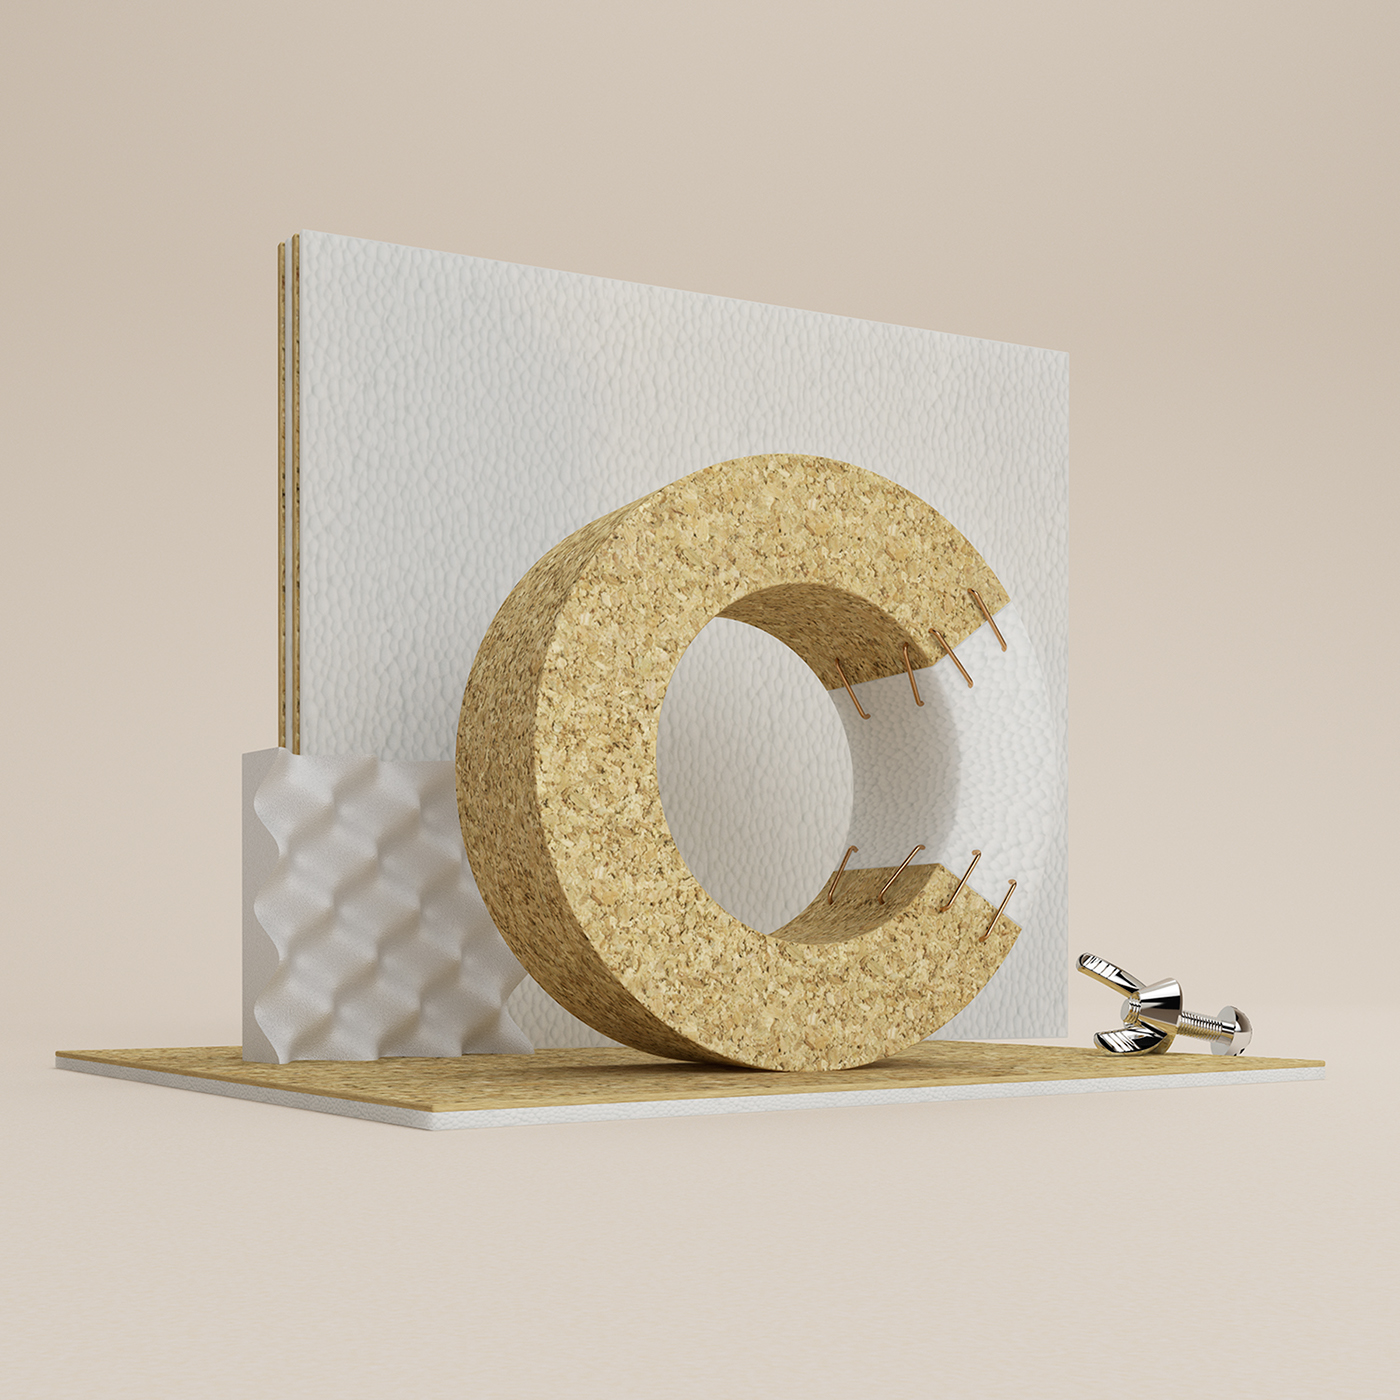 36days 36daysoftype CGI 3D type font plants water fire metal ad free inspire pantone campaign